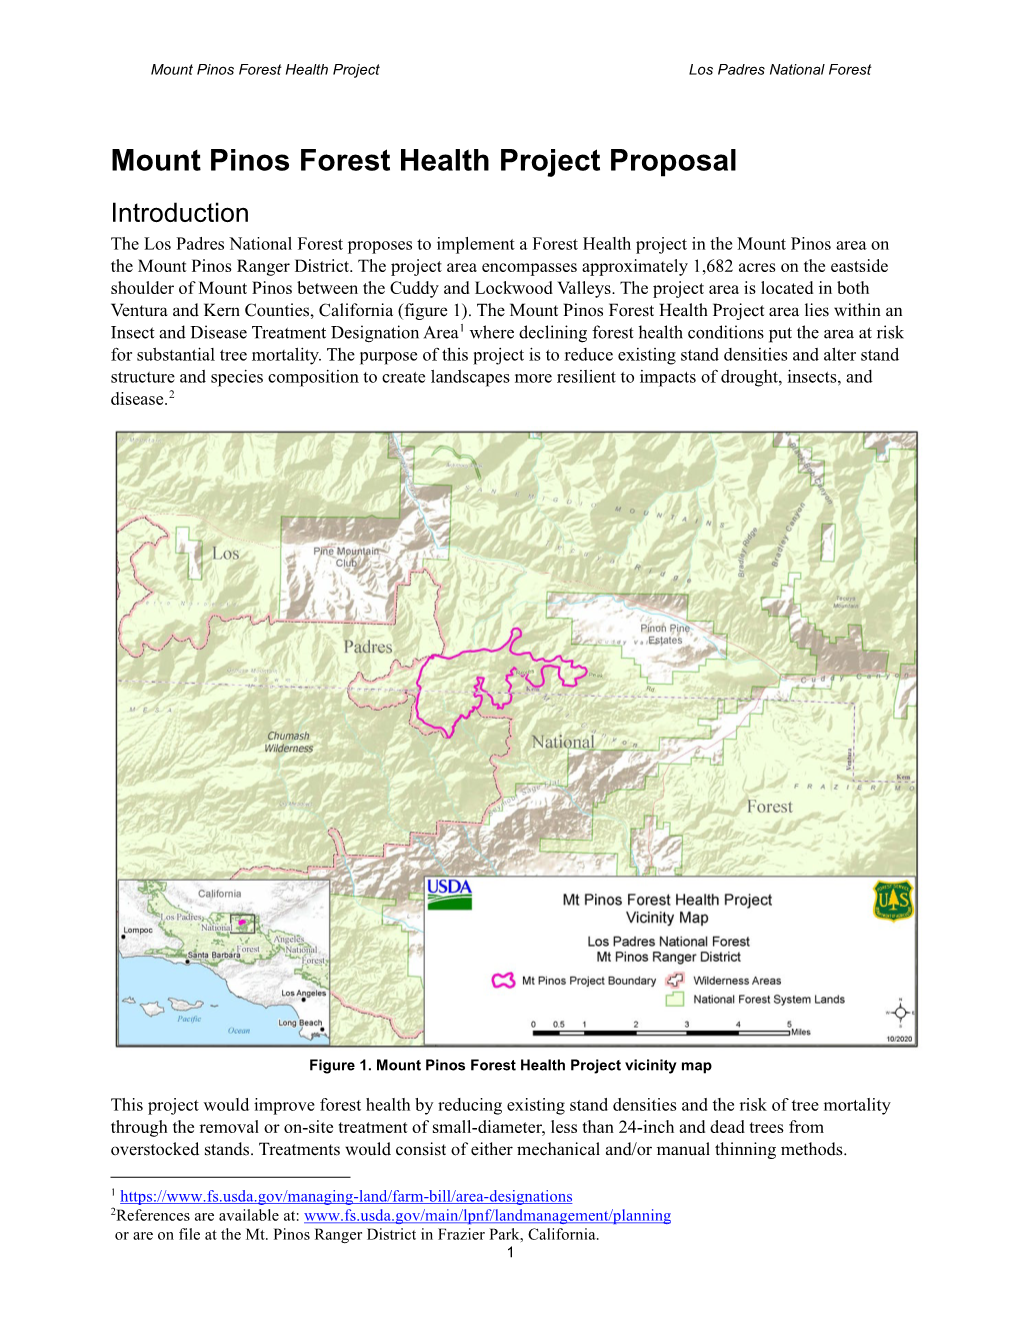 Mount Pinos Forest Health Project Proposal